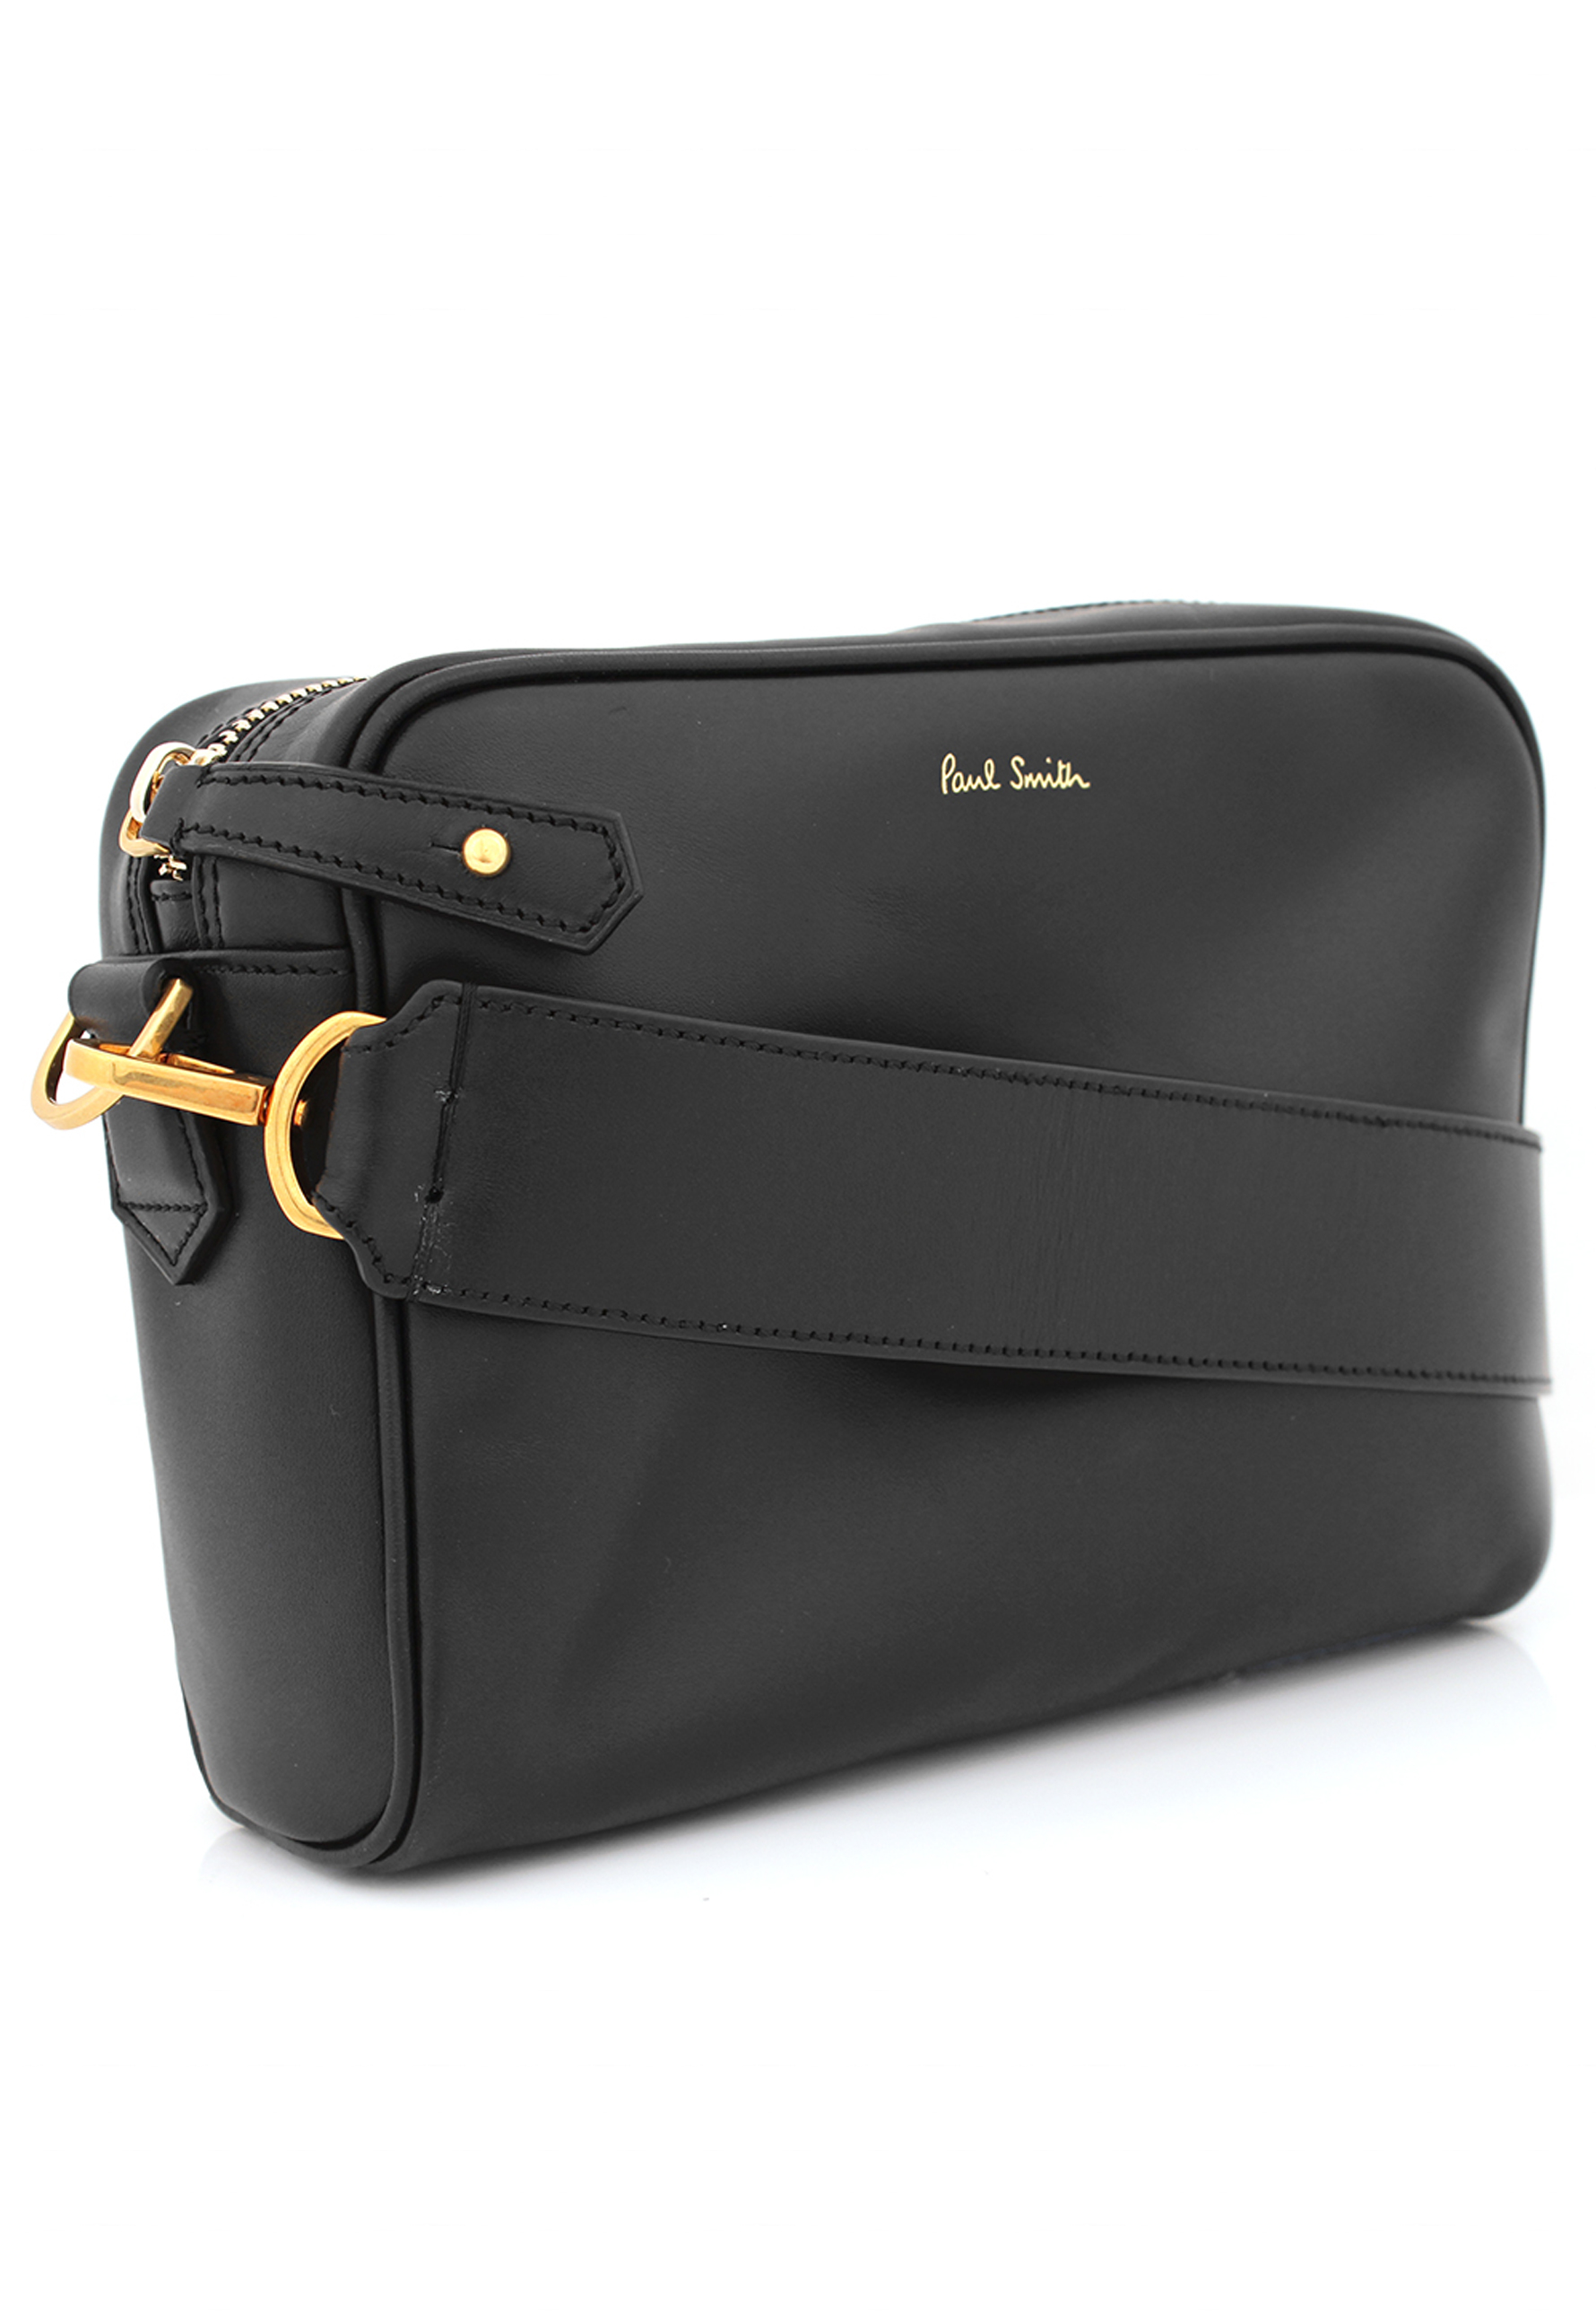 Paul Smith Small Leather Cross Body Bag Black.html Black D4ee799a  